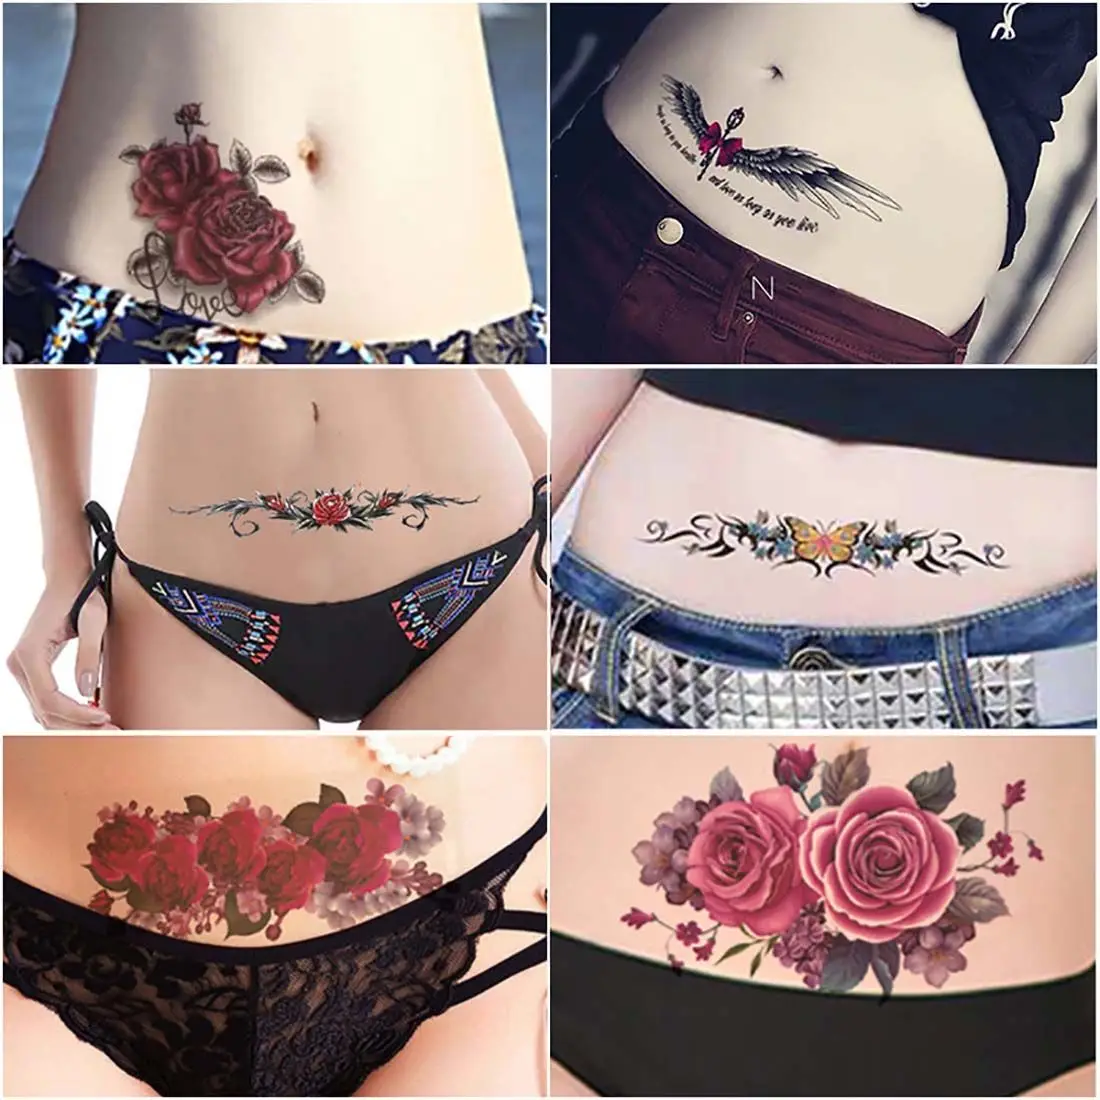 

Sexy Waterproof Leg Body Art Removable Black Rose Butterfly Design Cover Scars 3D Body Tattoo Sticker Temporary Decal